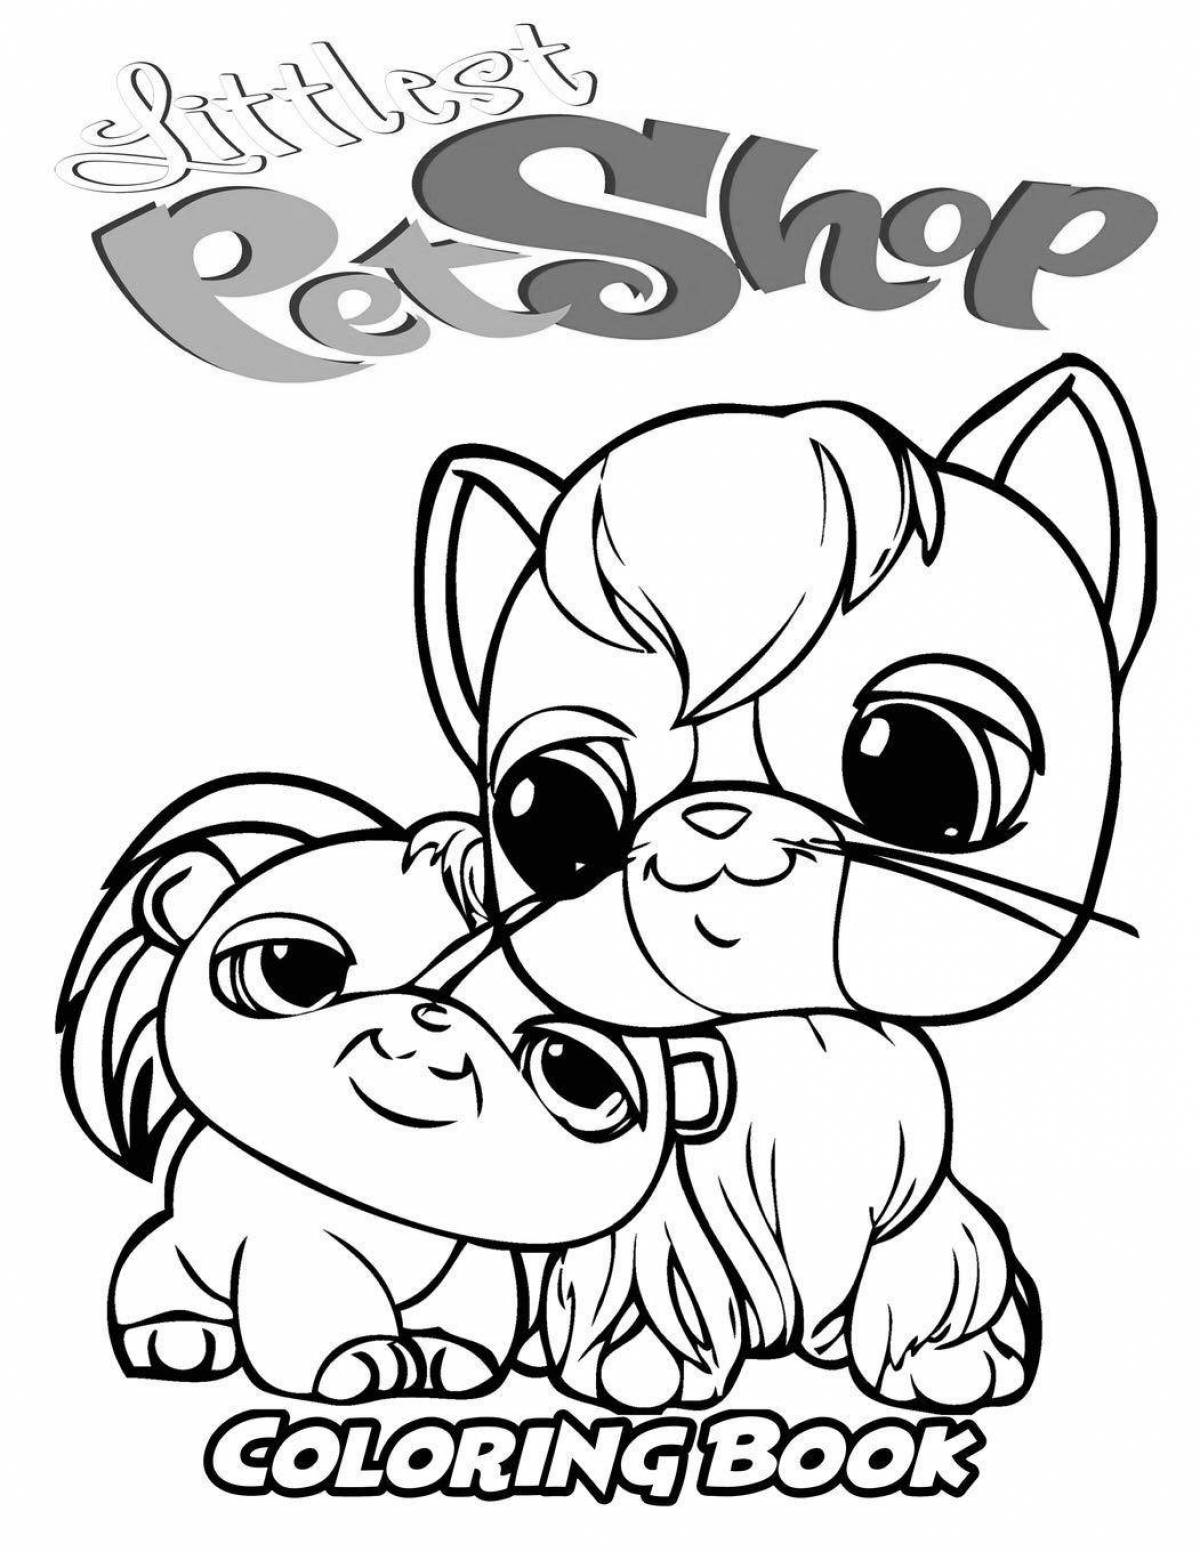 Glowing coloring pages for girls, cats and dogs